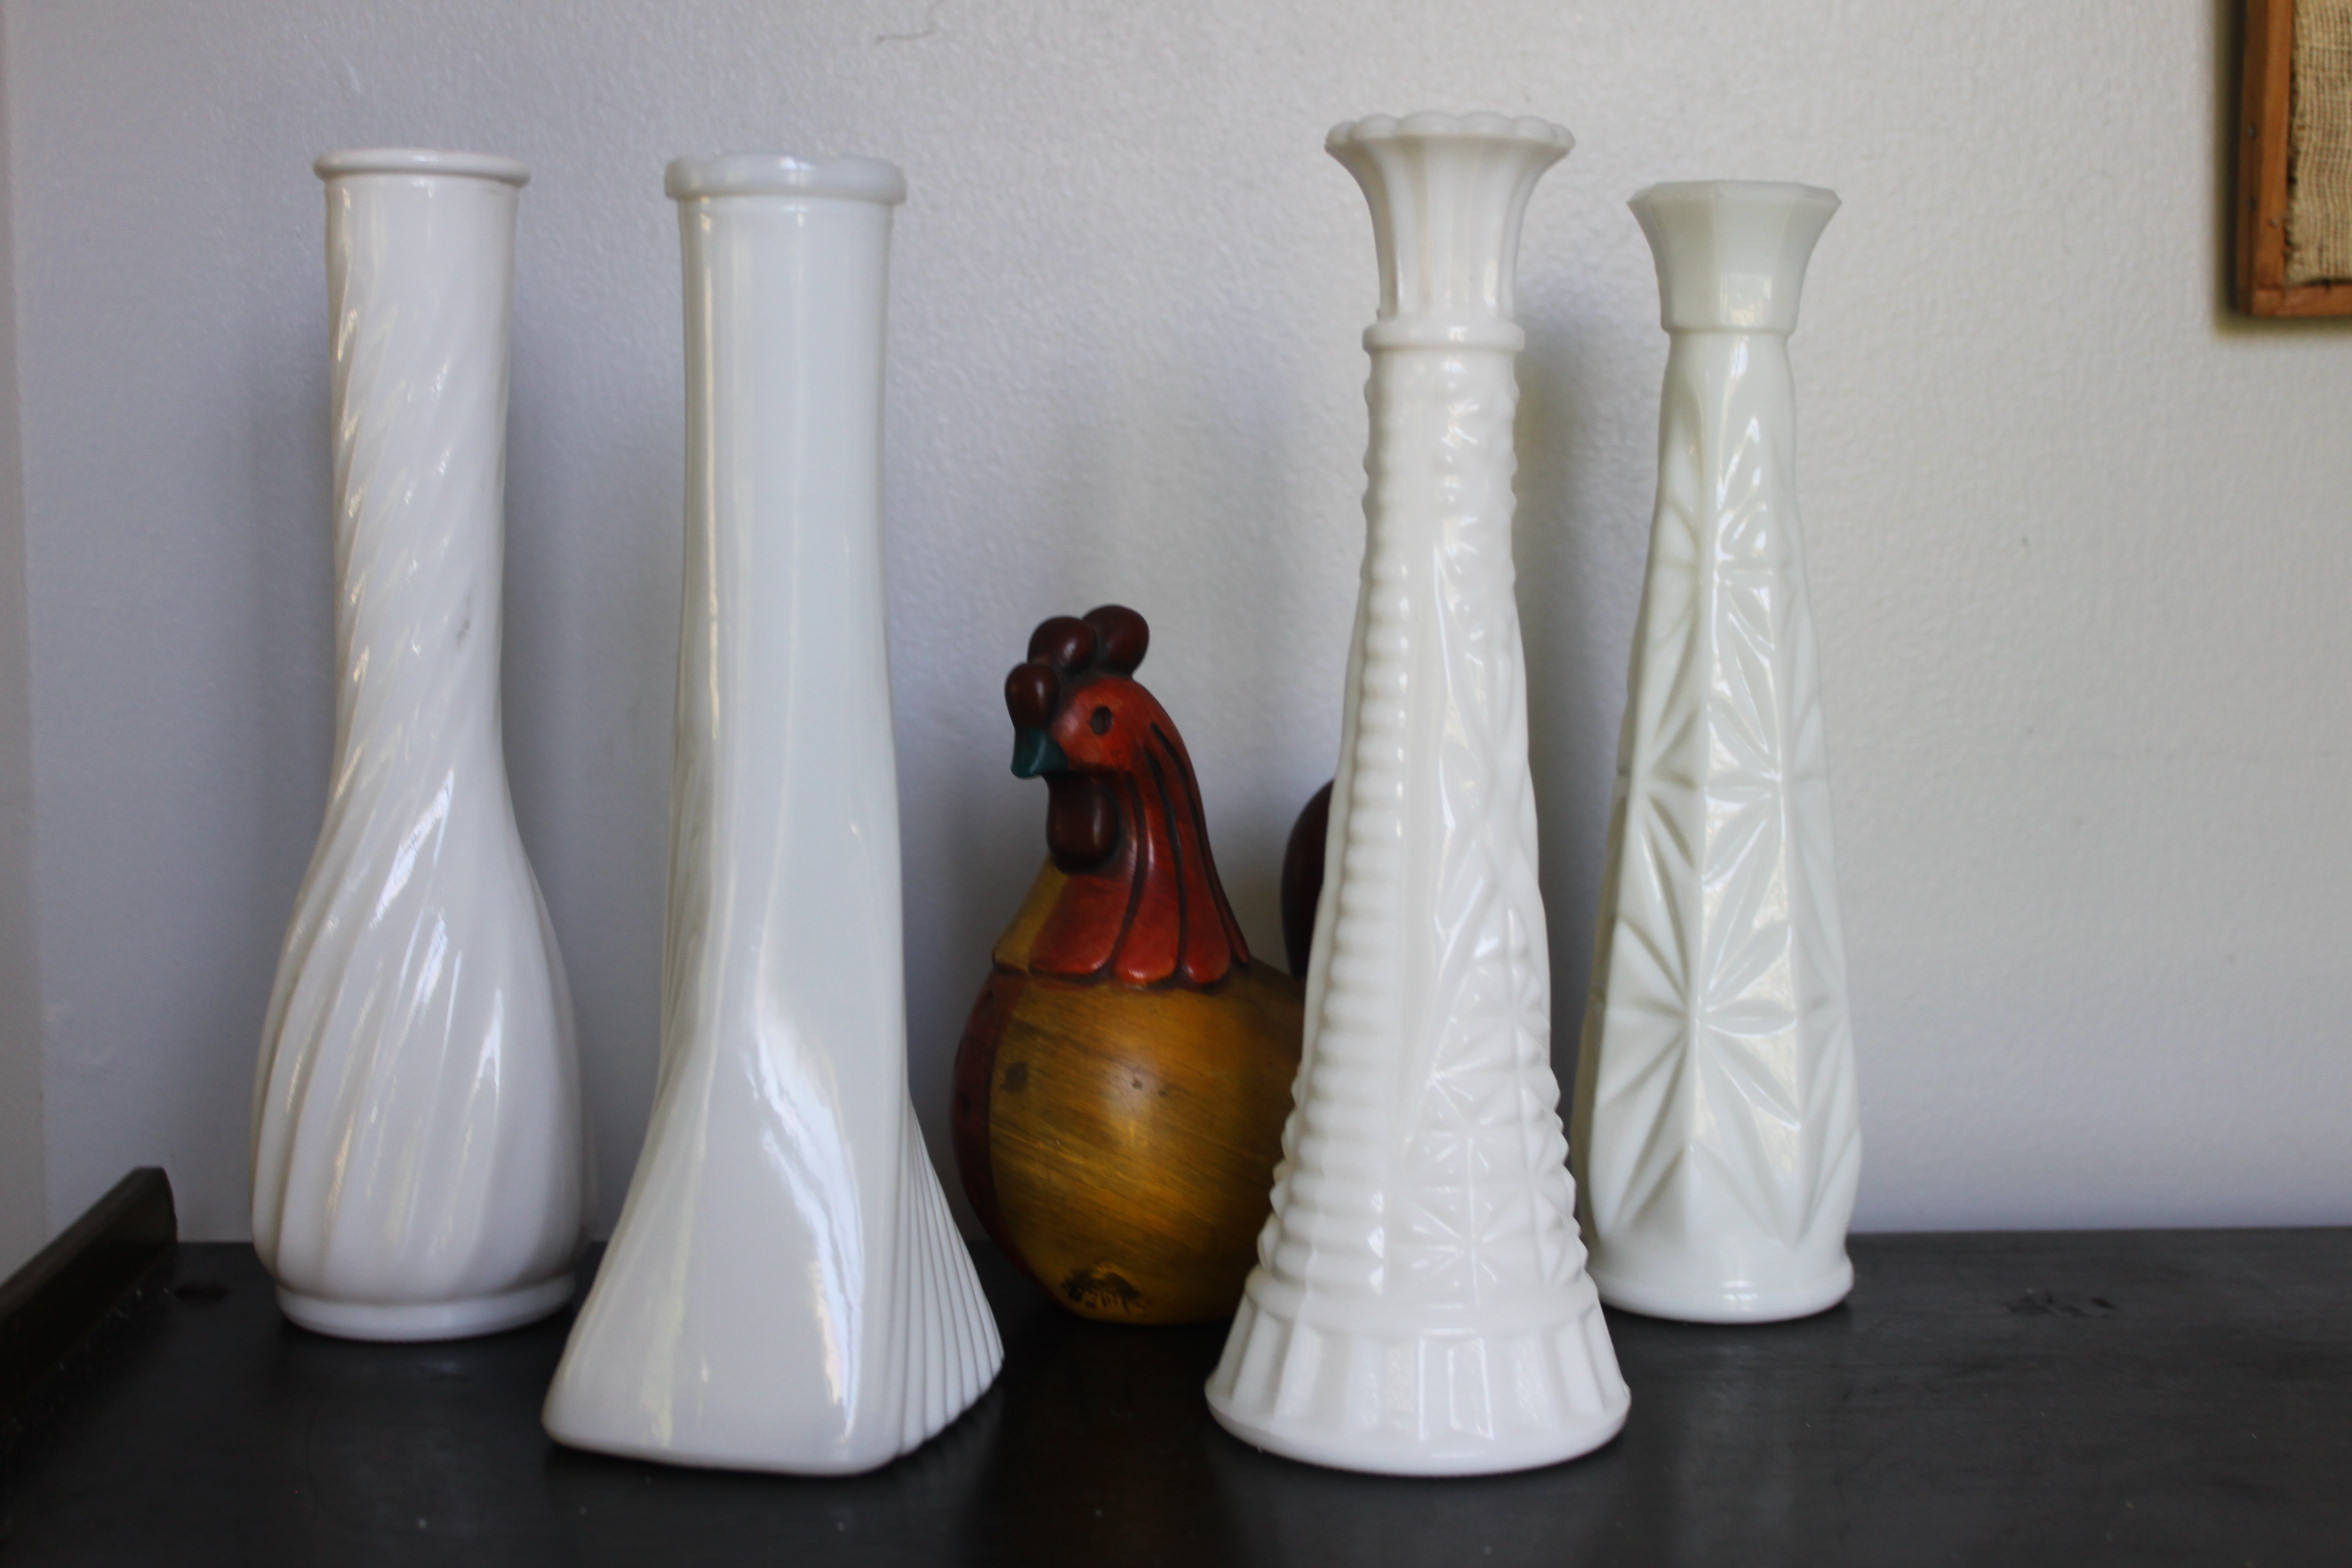 17 attractive Lead Crystal Bud Vase 2023 free download lead crystal bud vase of sleek set of 4 different styles set of beautiful milkglass throughout description set of 4 unique milk glass vases